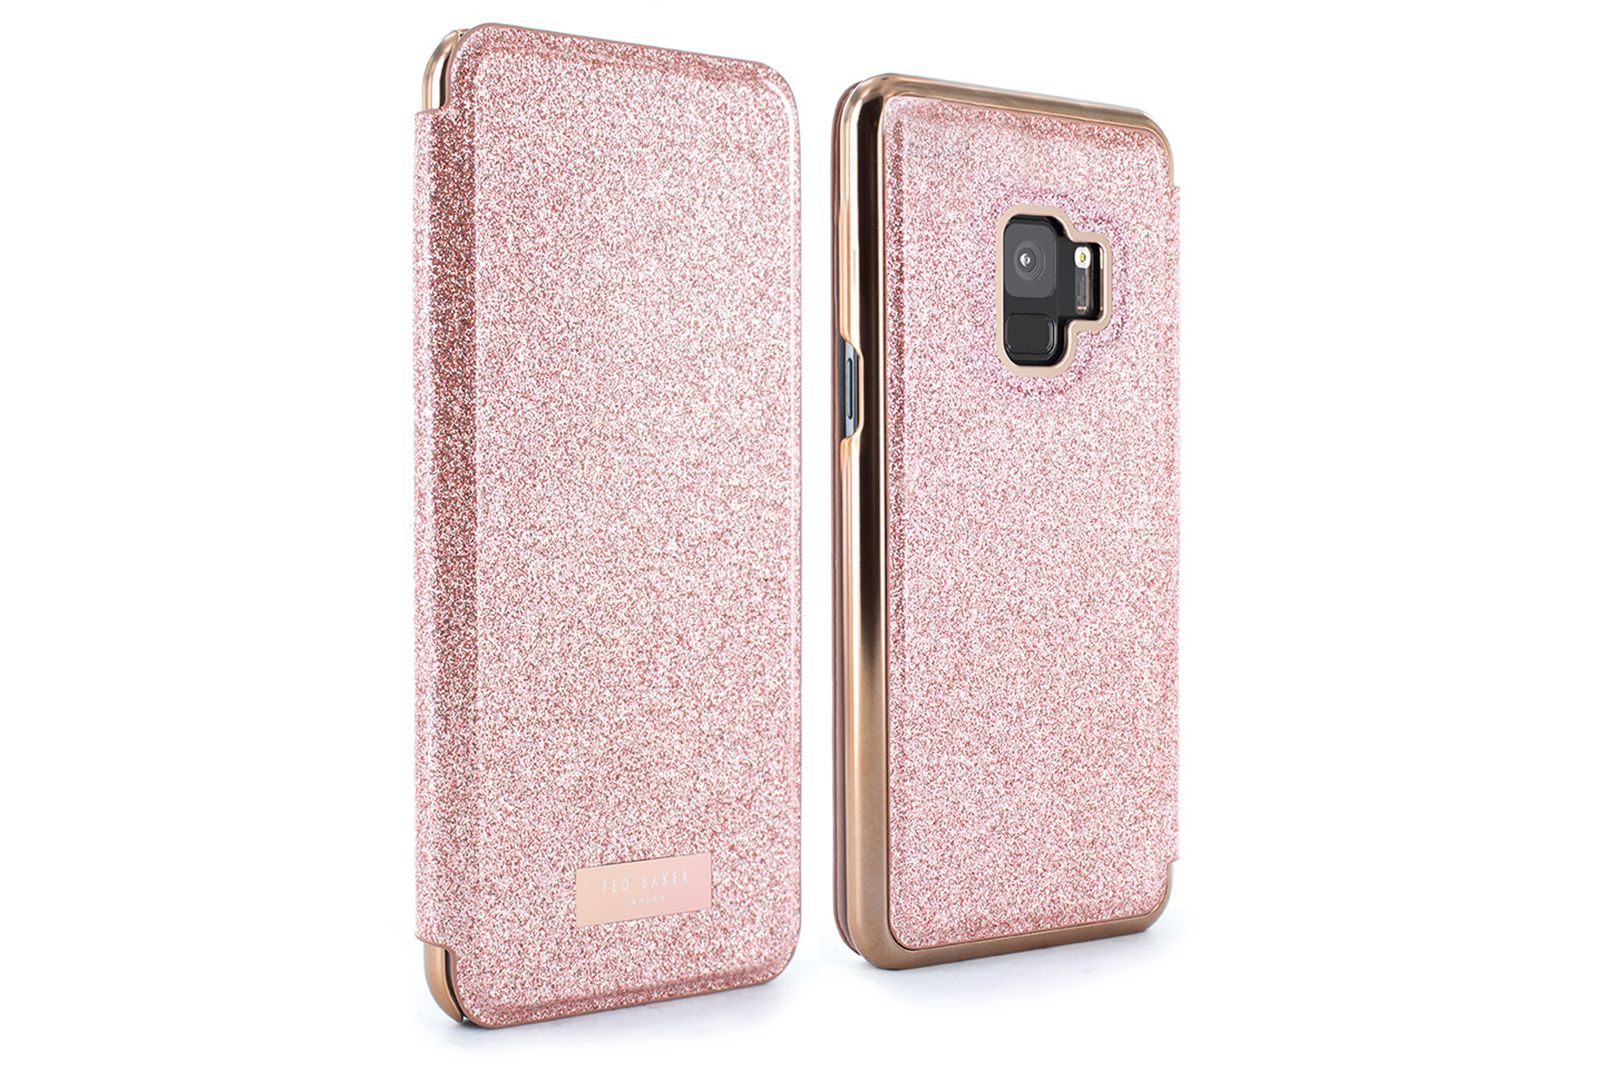 Best Samsung Galaxy S9 cases and S9 cases Protect your new Galaxy smartphone image 4